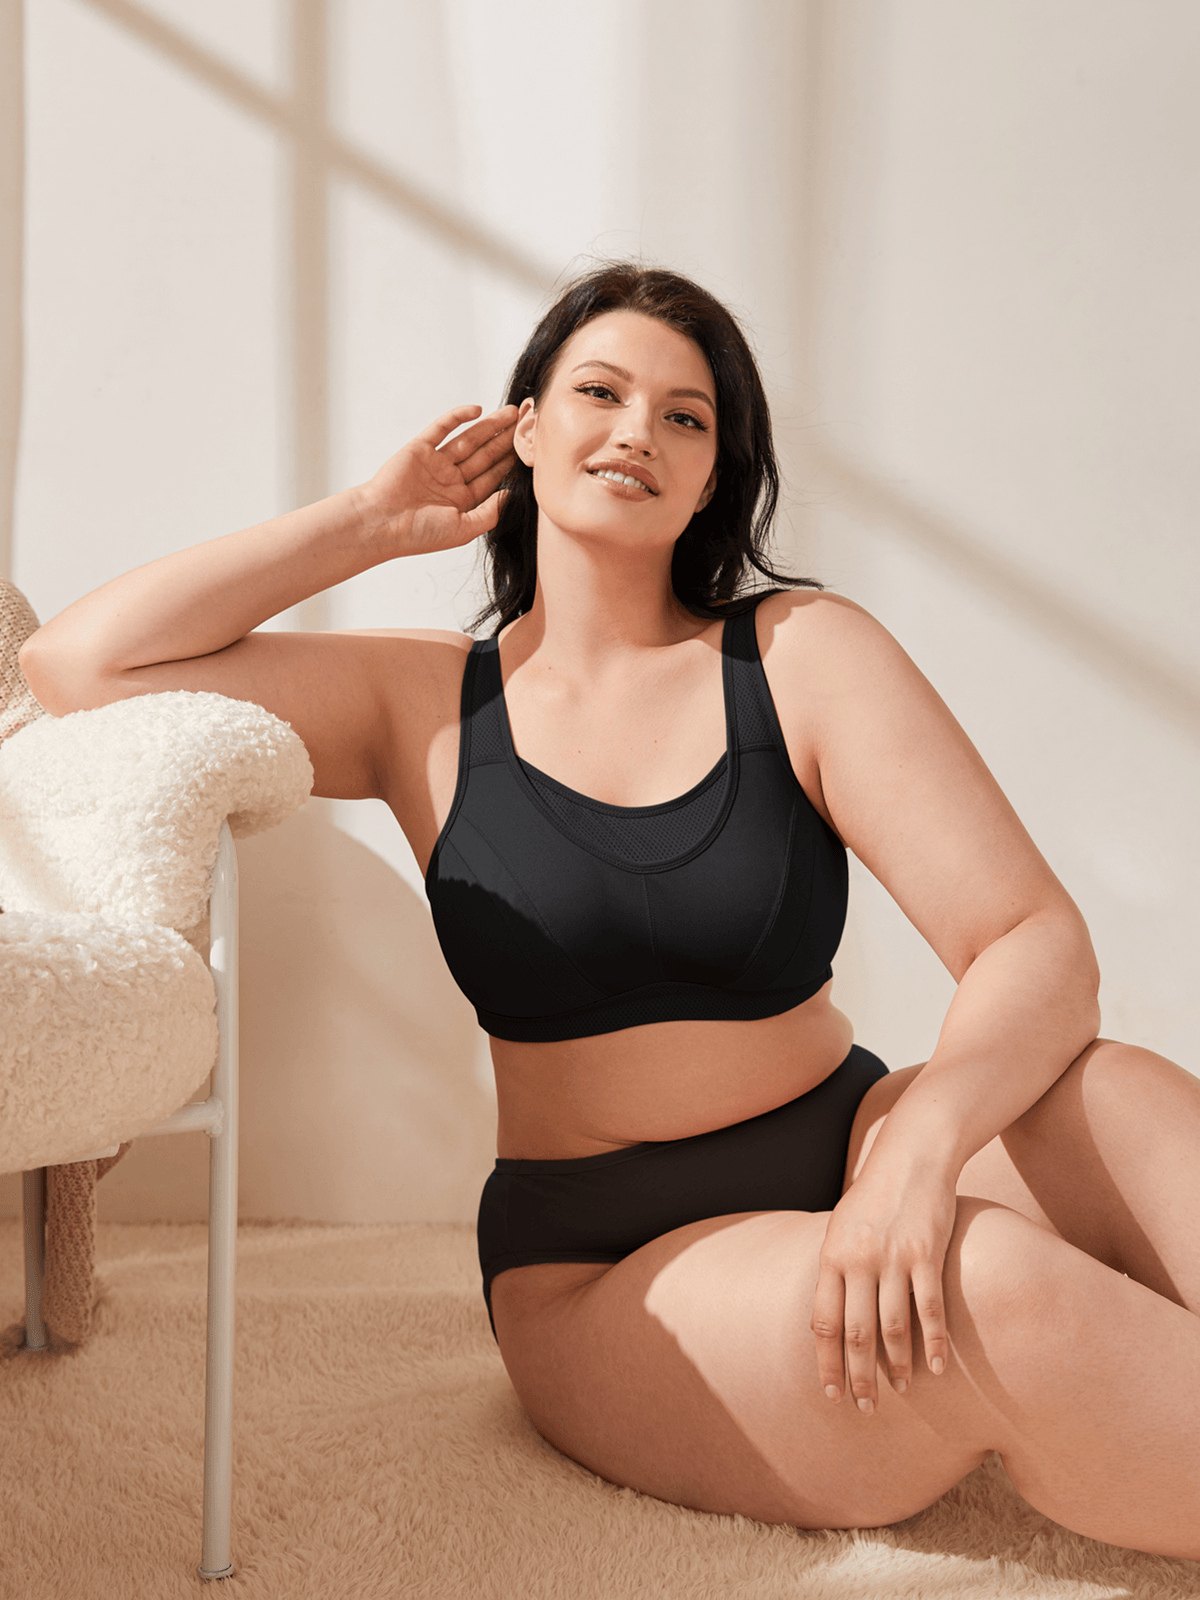 APEXFWDT Wirefree Sport Bras for Women Plus Size Comfortable